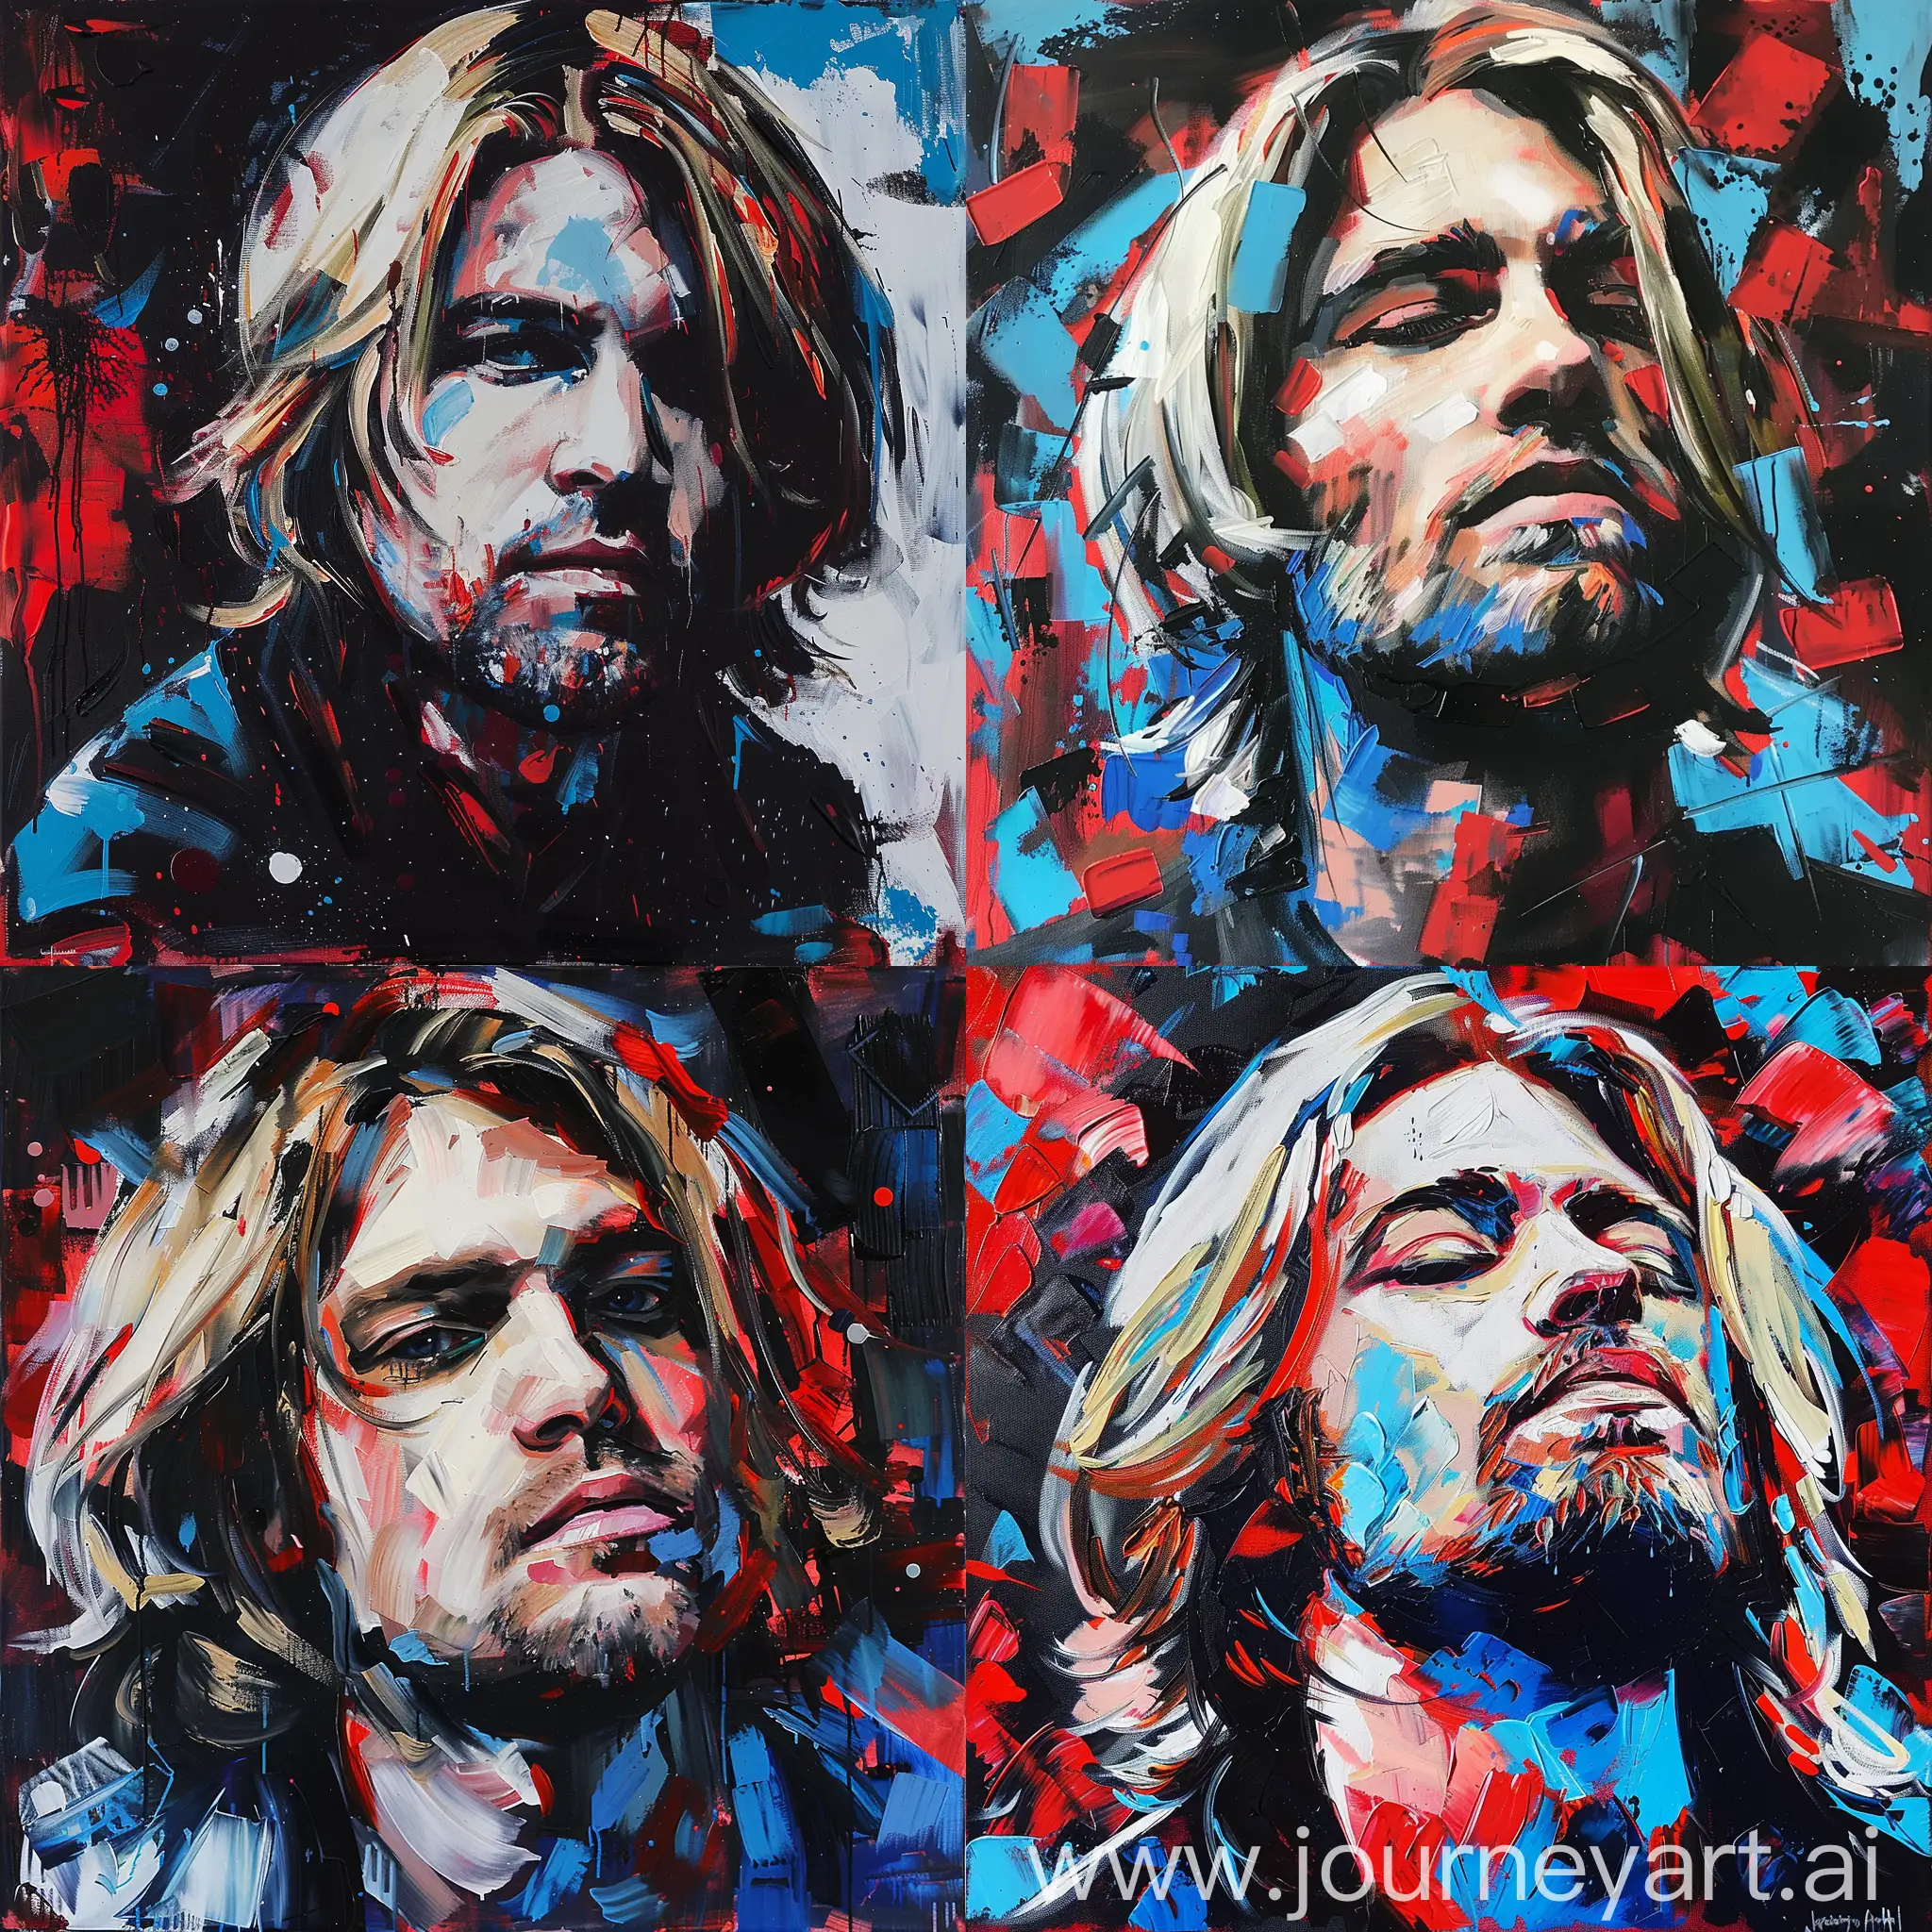 oil painting of kurt cobain in star wars style, The overall color palette of the painting should includes vibrant and bold colors such as red, blue, black, and white. The colors used in the painting are bright and vivid, reflecting a dynamic and energetic tone. 